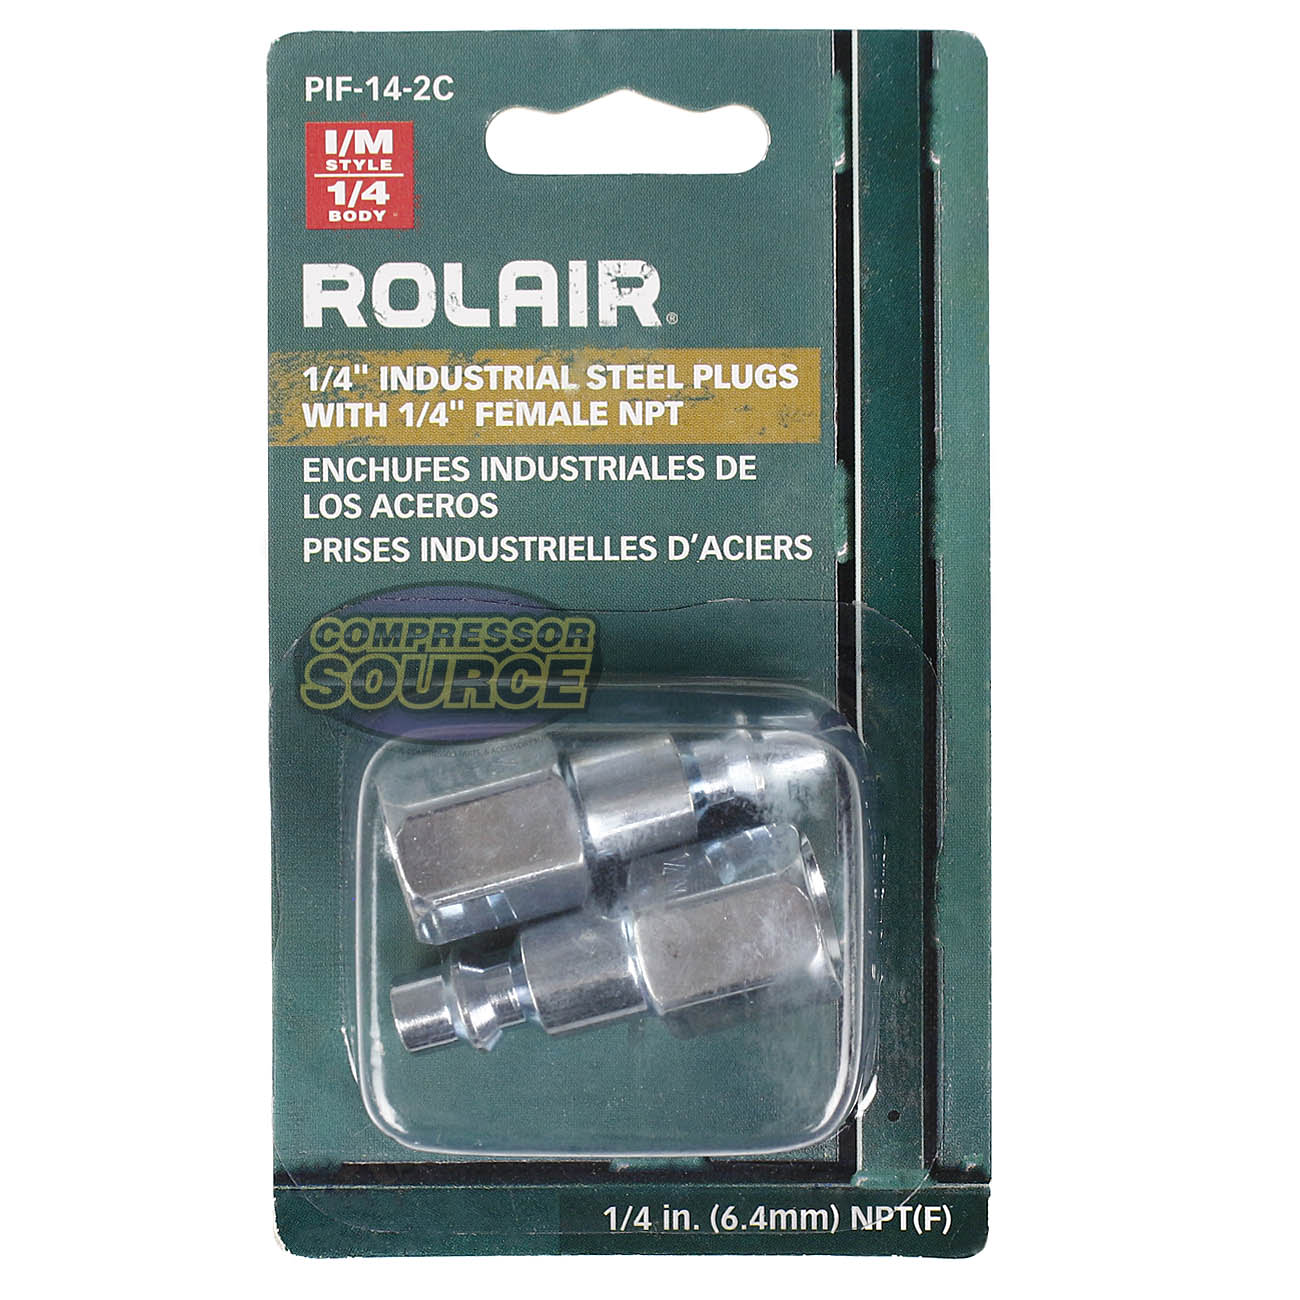 Rolair 1/4" Industrial I/M Steel Plugs with 1/4" Female NPT 2 Pack PIF-14-2C